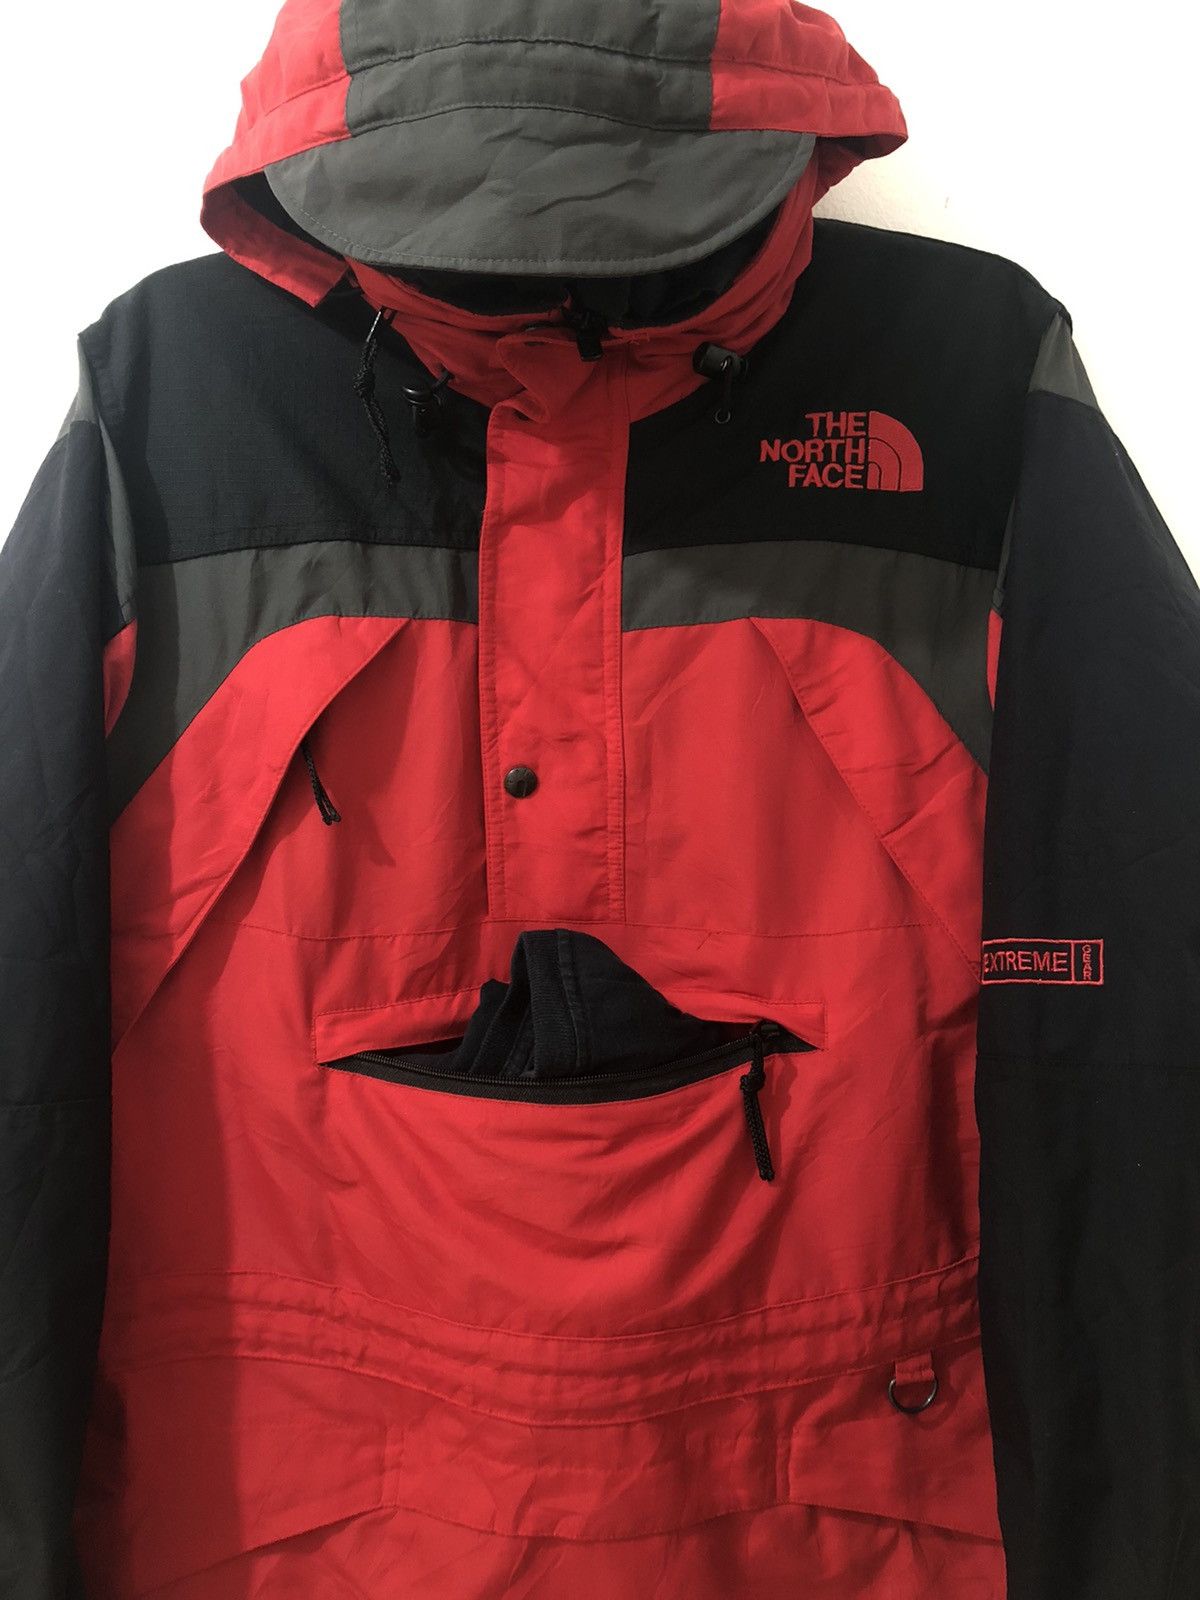 Rare 90s North Face Extreme Gear Pullover Jacket - 8